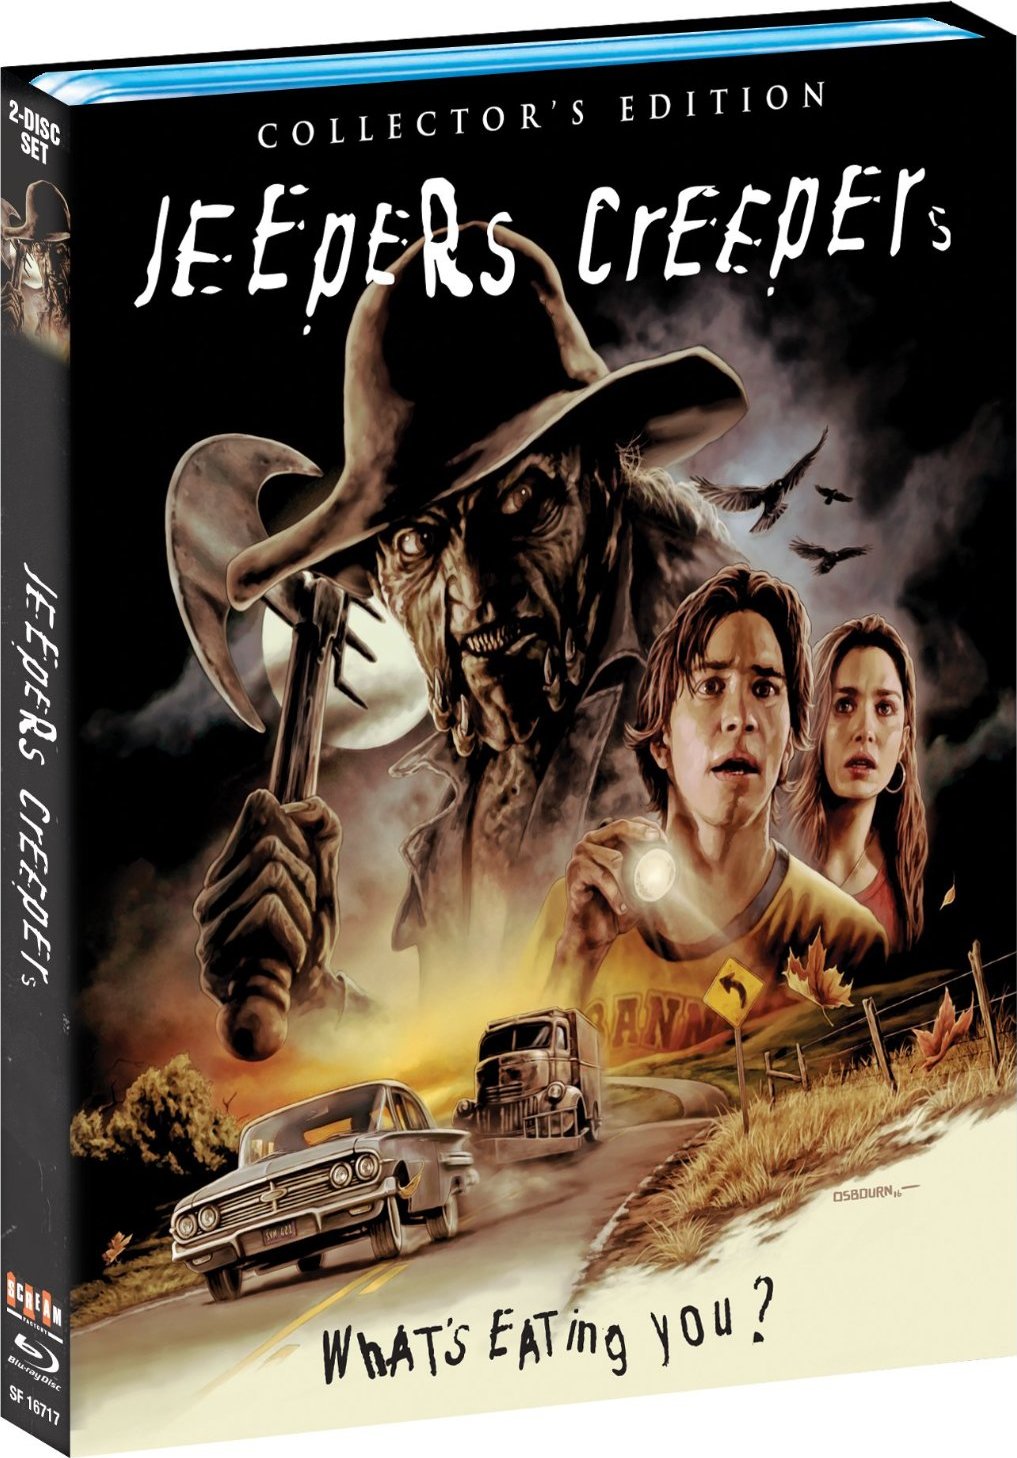 Jeepers Creepers: Collector's Edition (2001) – Blurays For Everyone